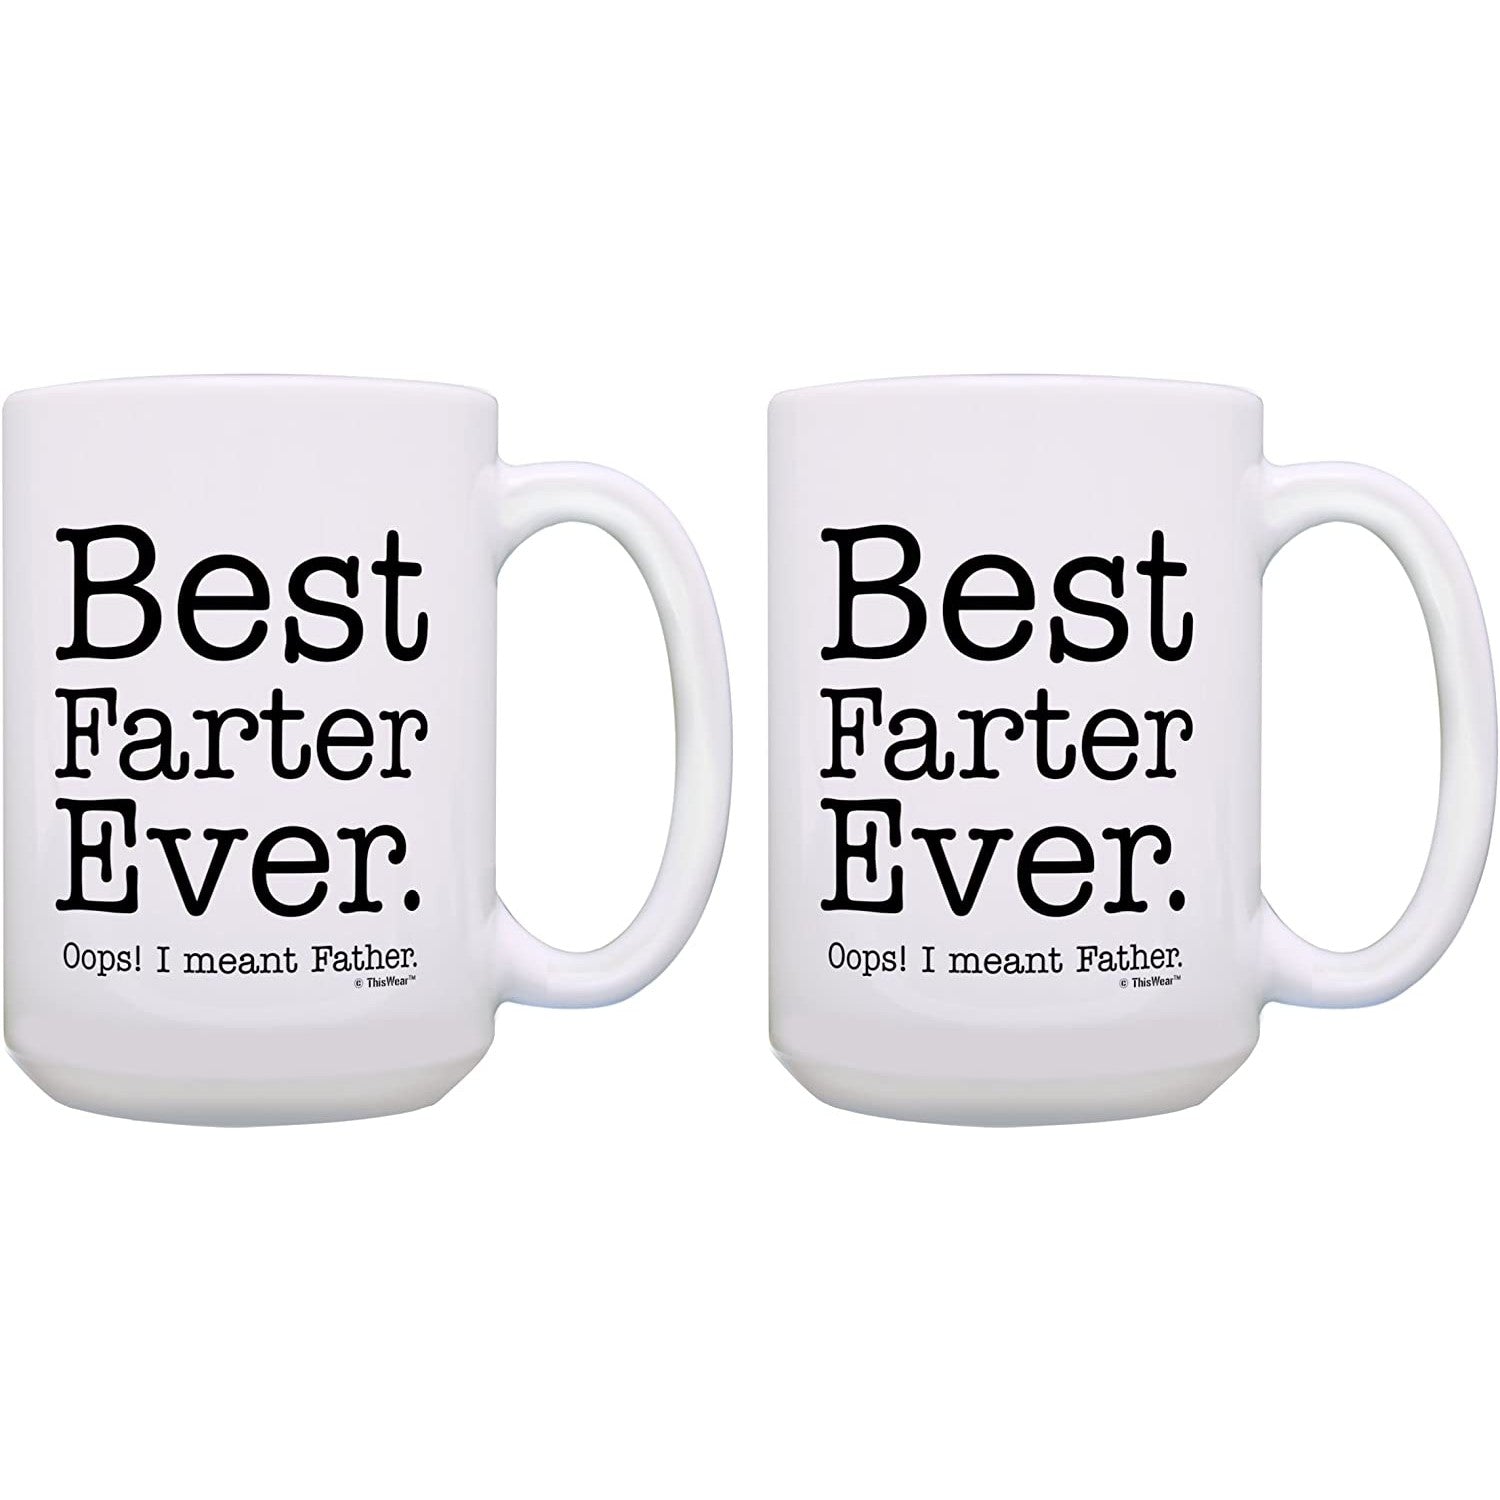 Two funny white mugs, they both feature printed text which says, 'Best Farter Ever. Oops! I meant Father.'